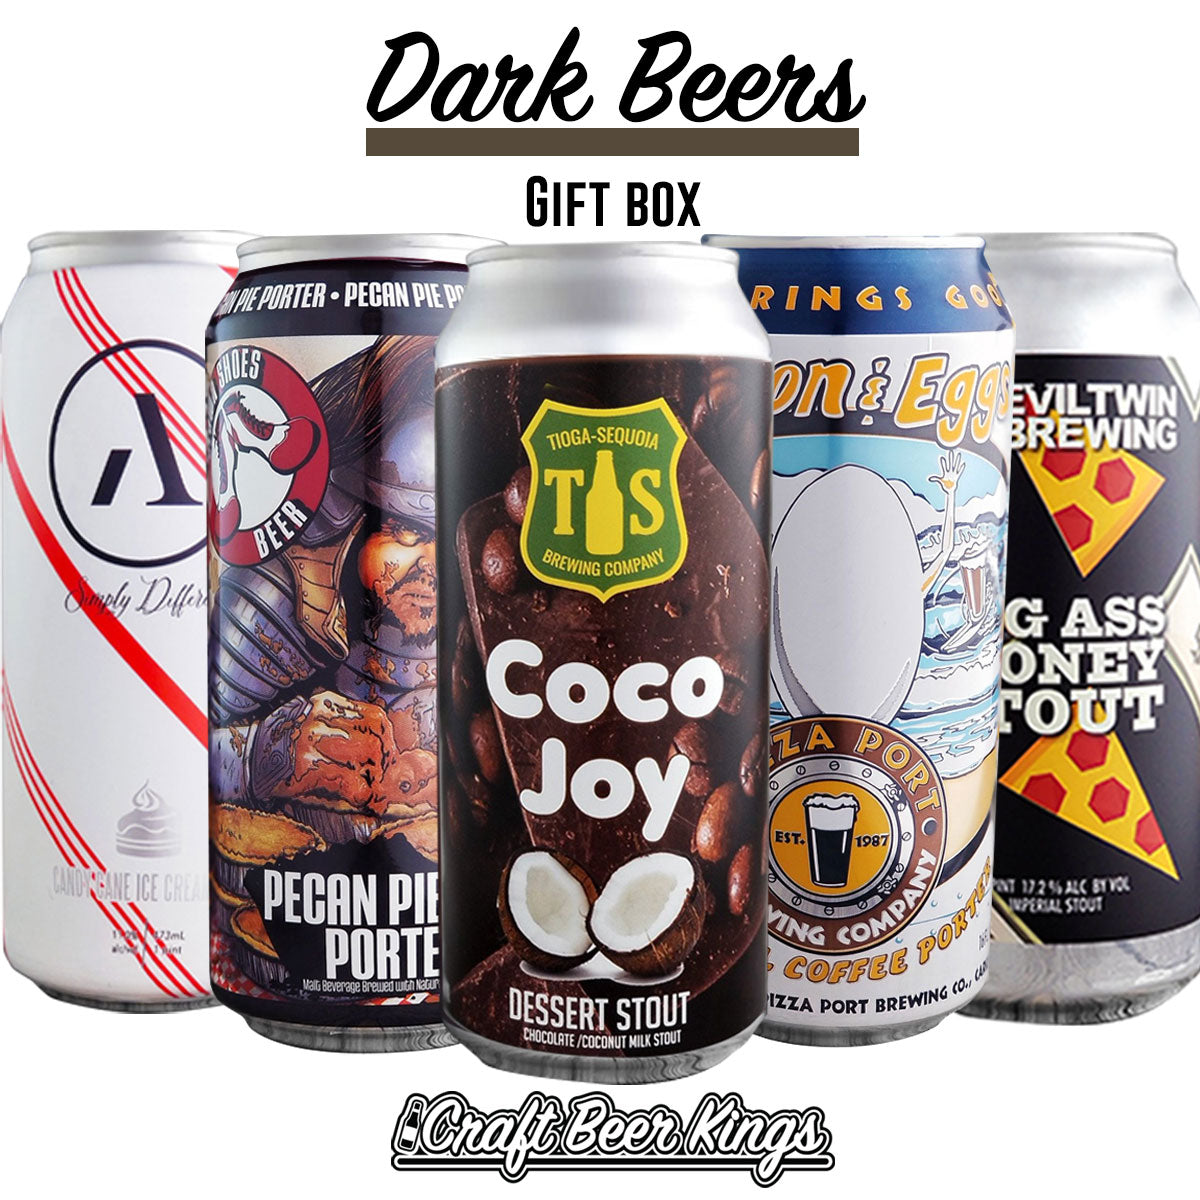 Dark Beers Gift Box - Shipping Included!